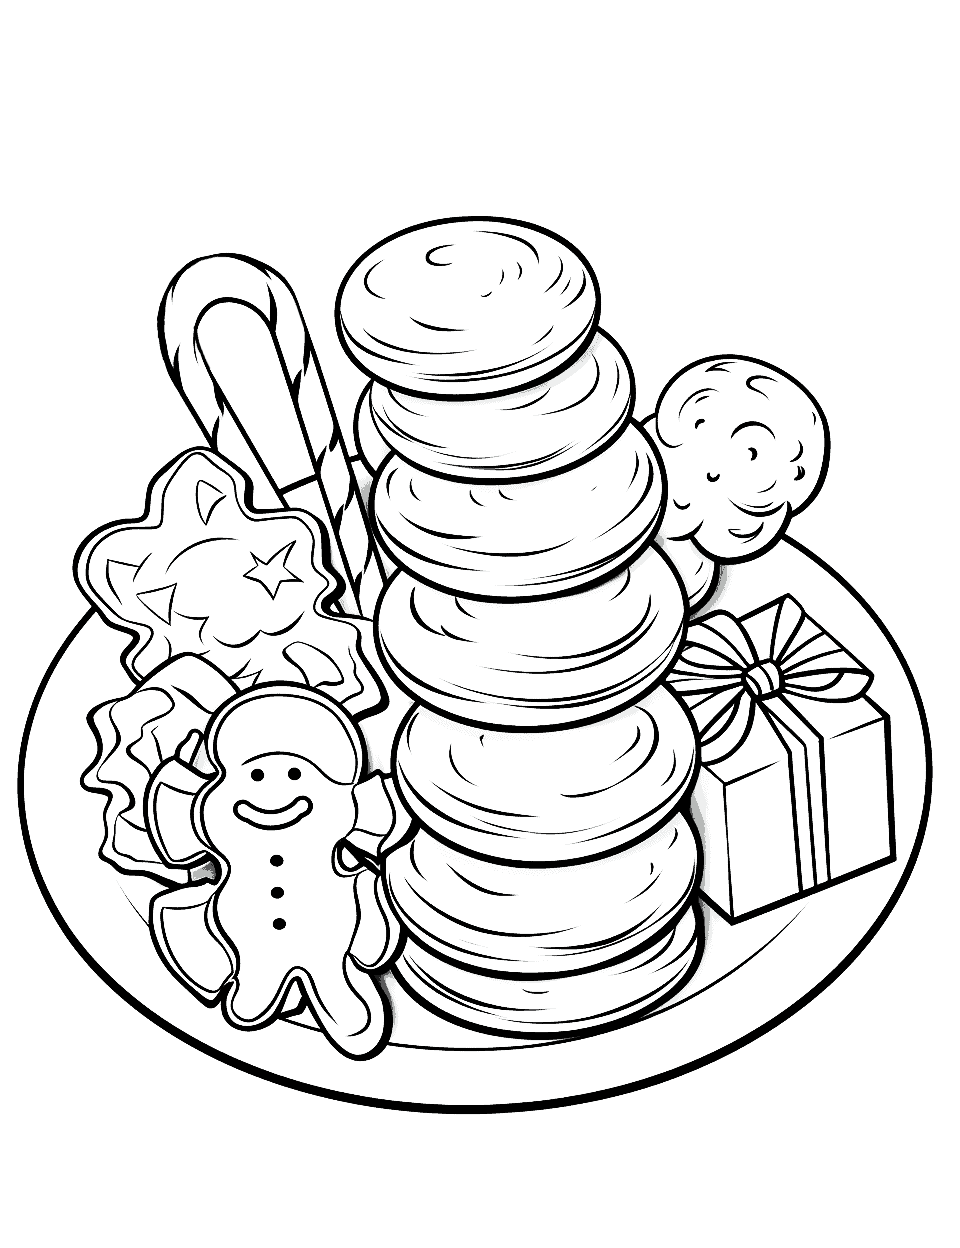 Holiday Cookies Christmas Coloring Page - A detailed coloring page of holiday cookies and sweets on a plate, ready to be left out for Santa.